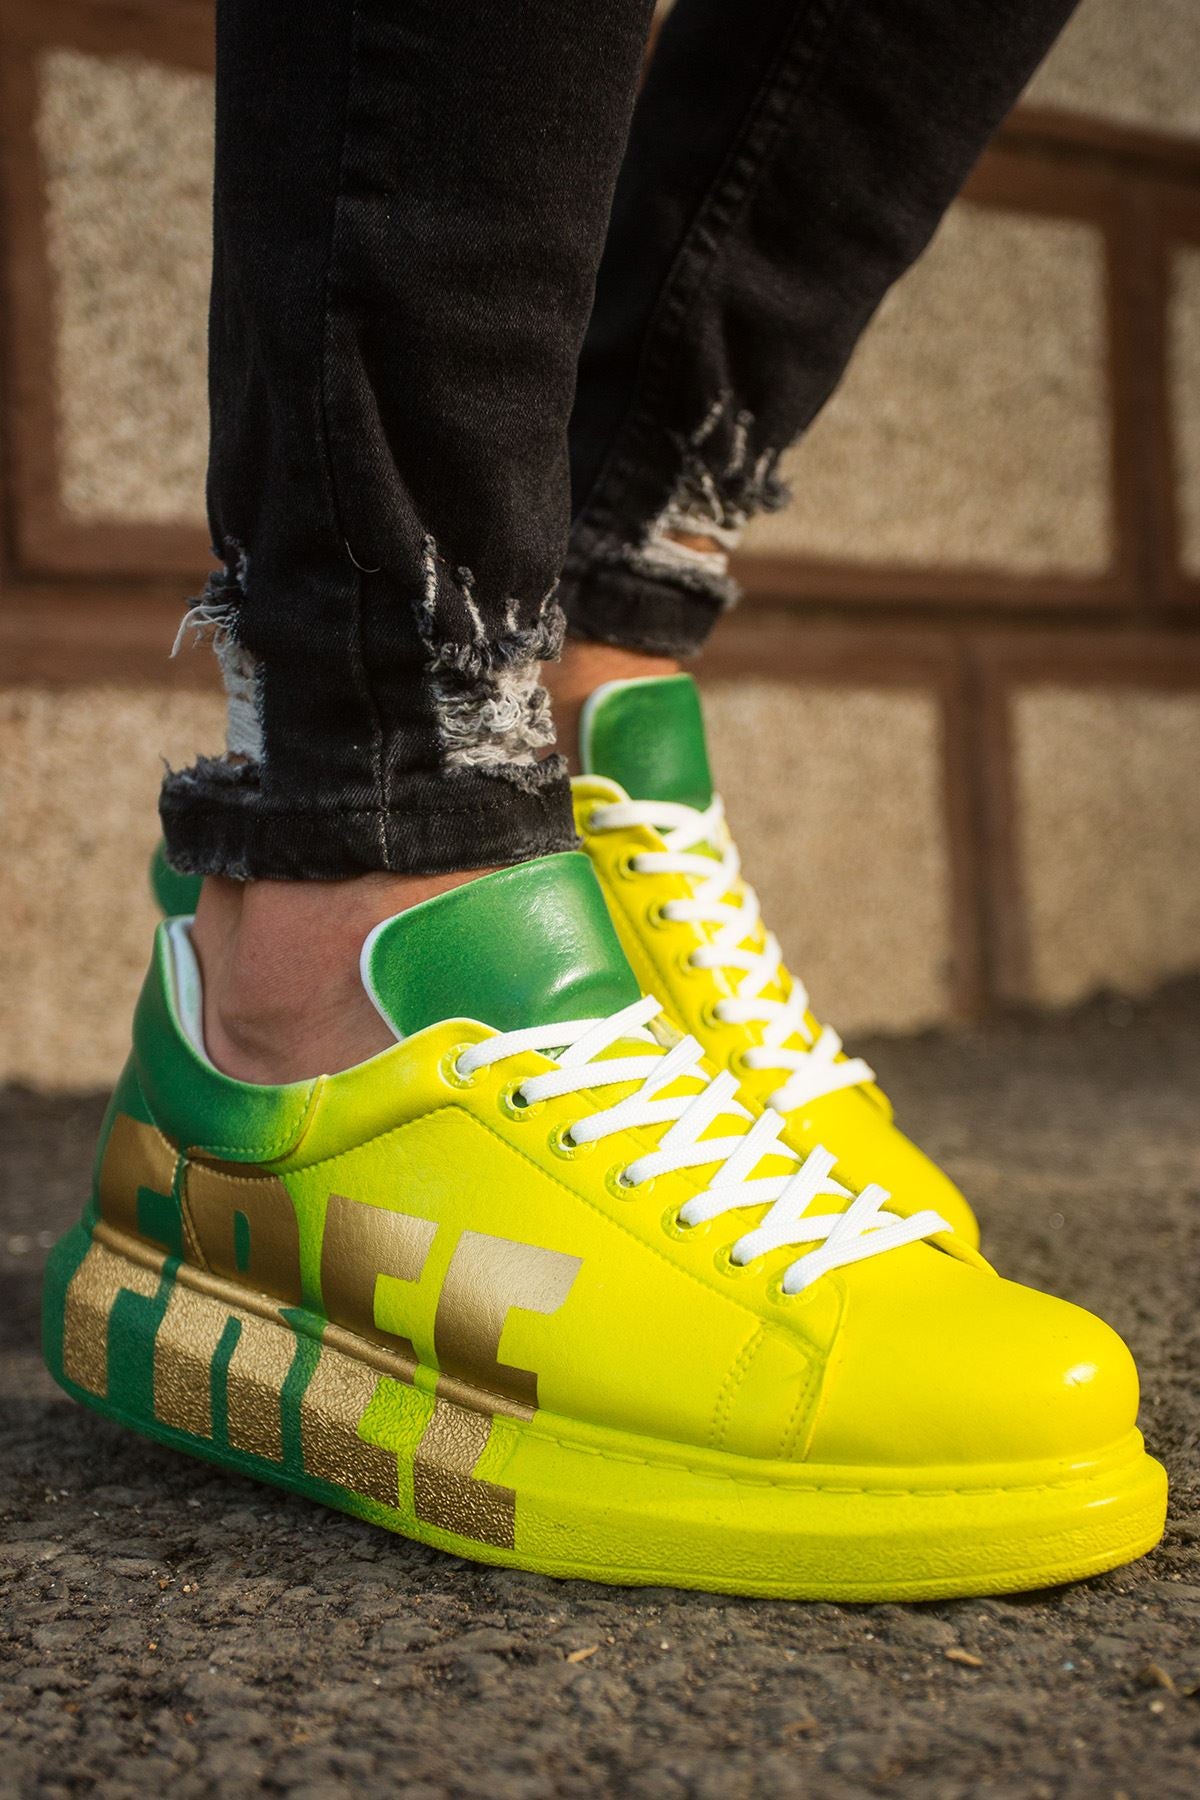 CH254 Yellow-Green Casual Men's Unisex Sneaker Sports Shoes - STREETMODE ™